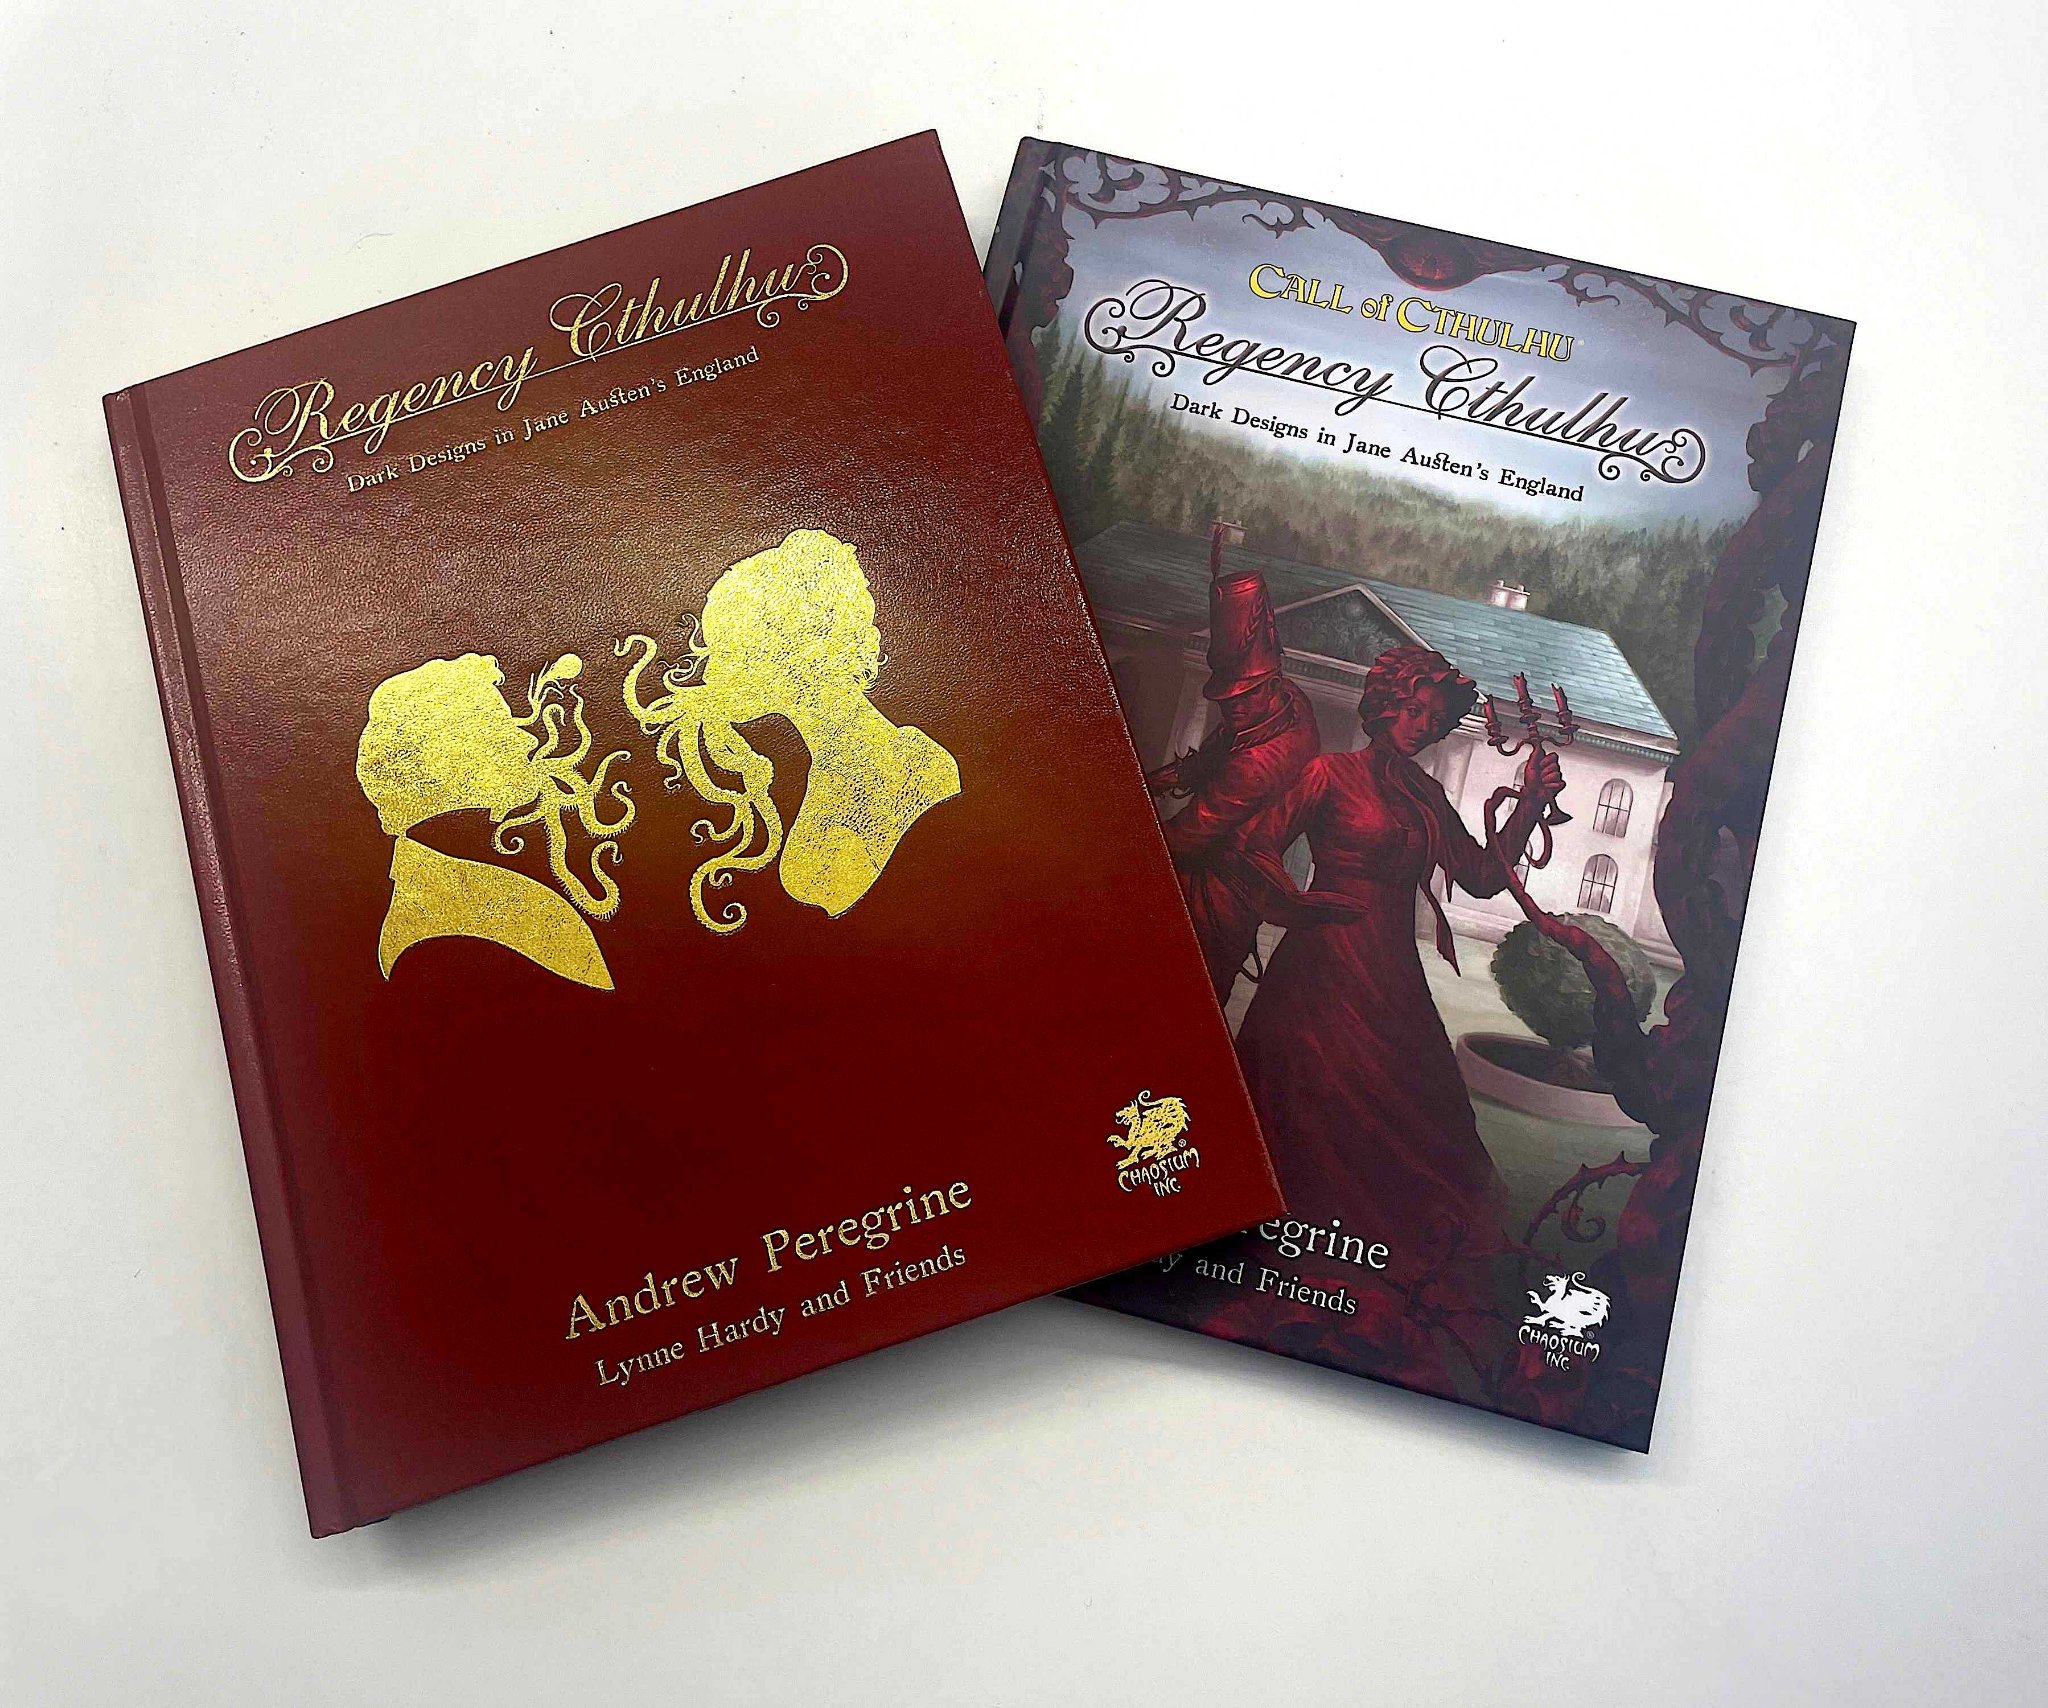 RegencyCthulhu hardback and special leatherette editions